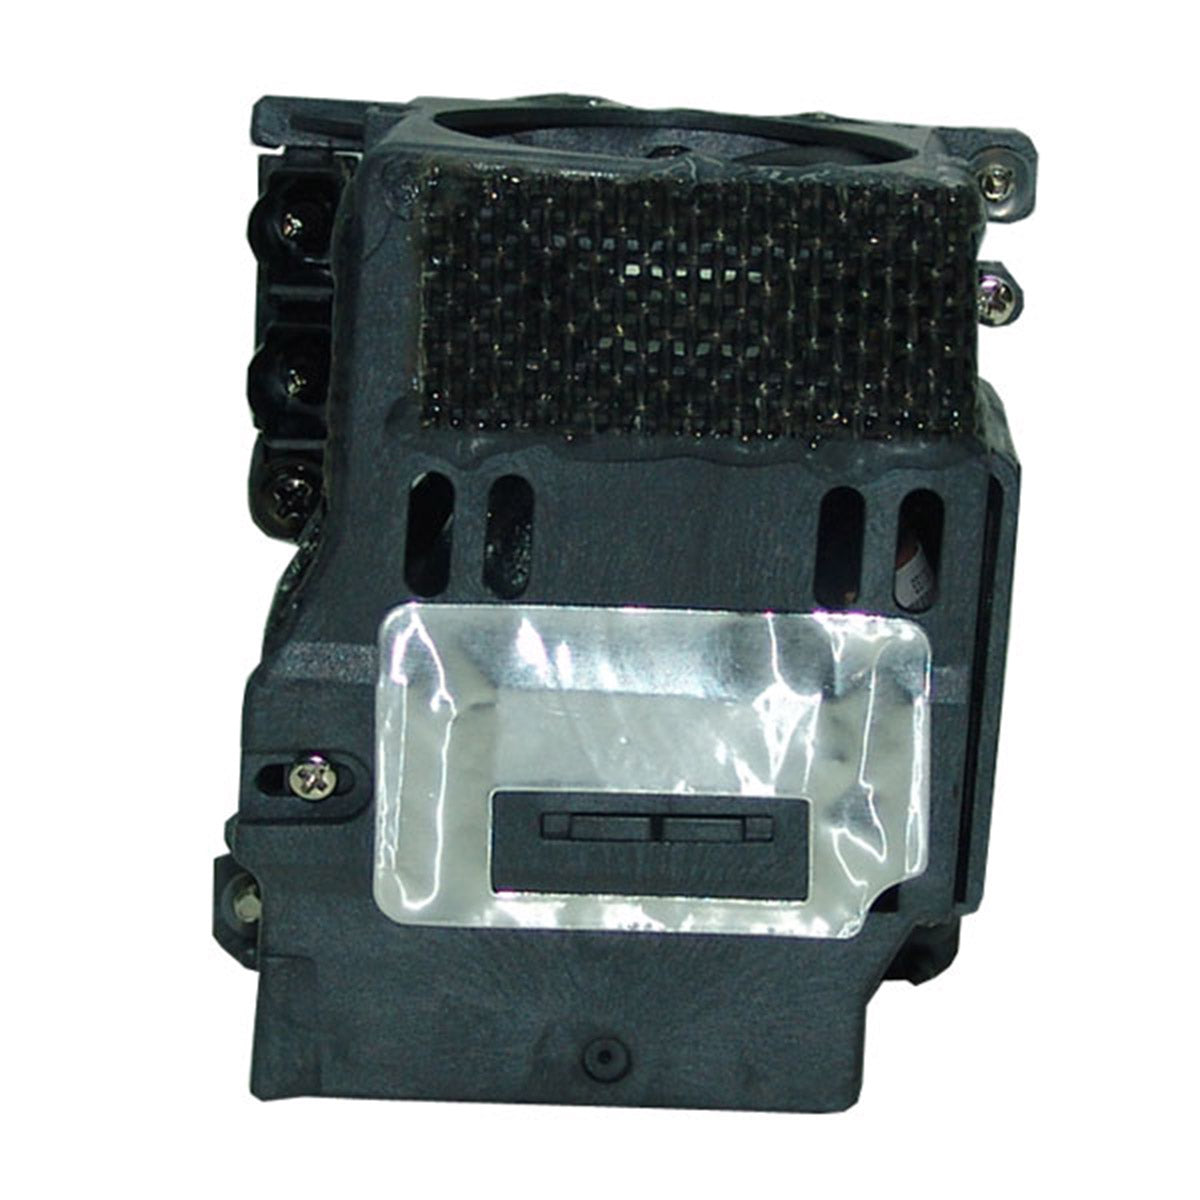 Philips LCA3113 Compatible Projector Lamp Module